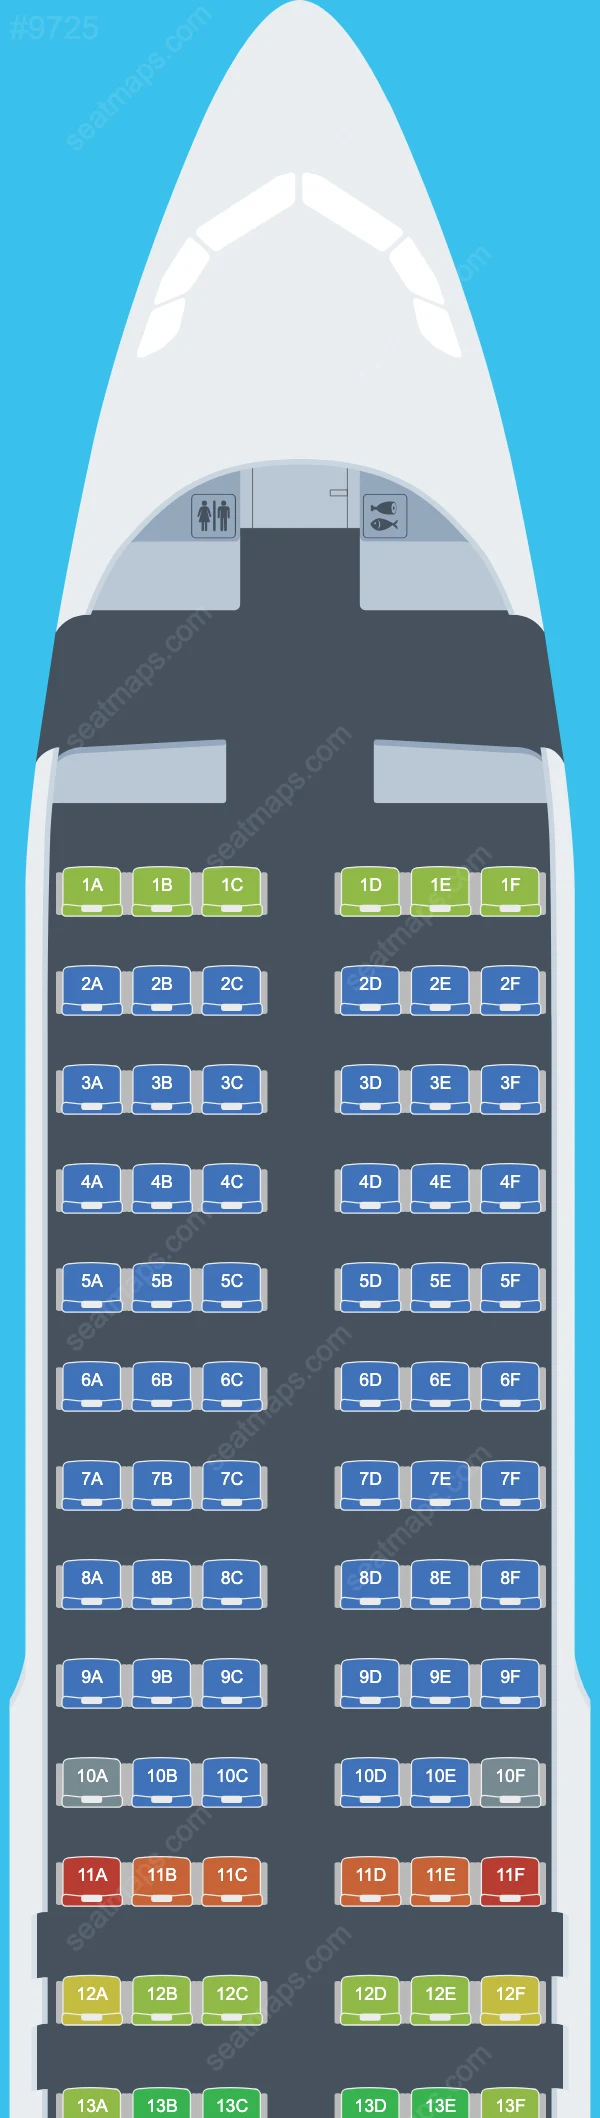 Vietnam Airlines Airbus A320 Seat Maps A320-200 V.2